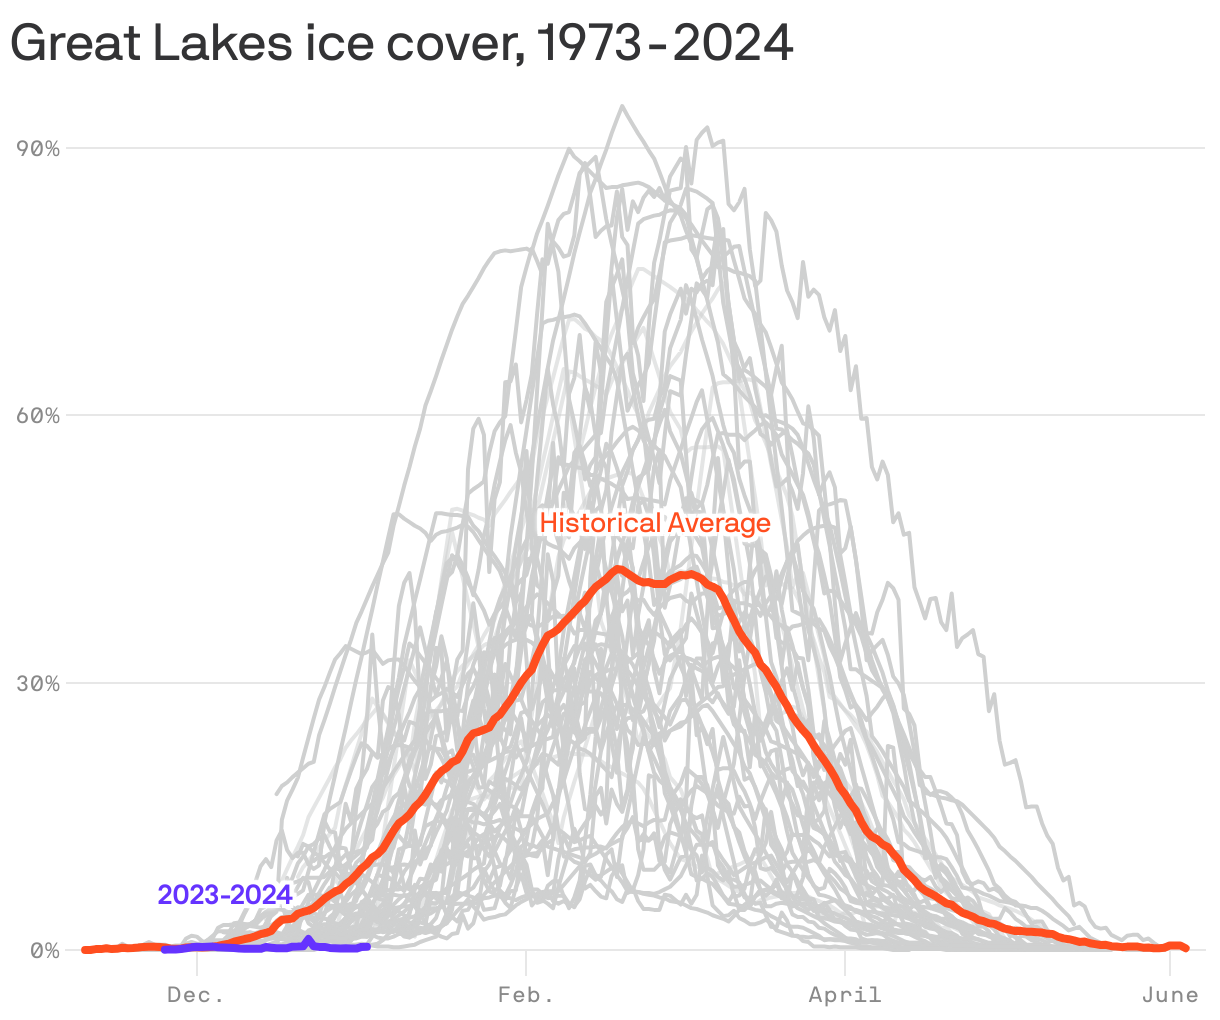 Great Lakes ice cover, 1973-2024